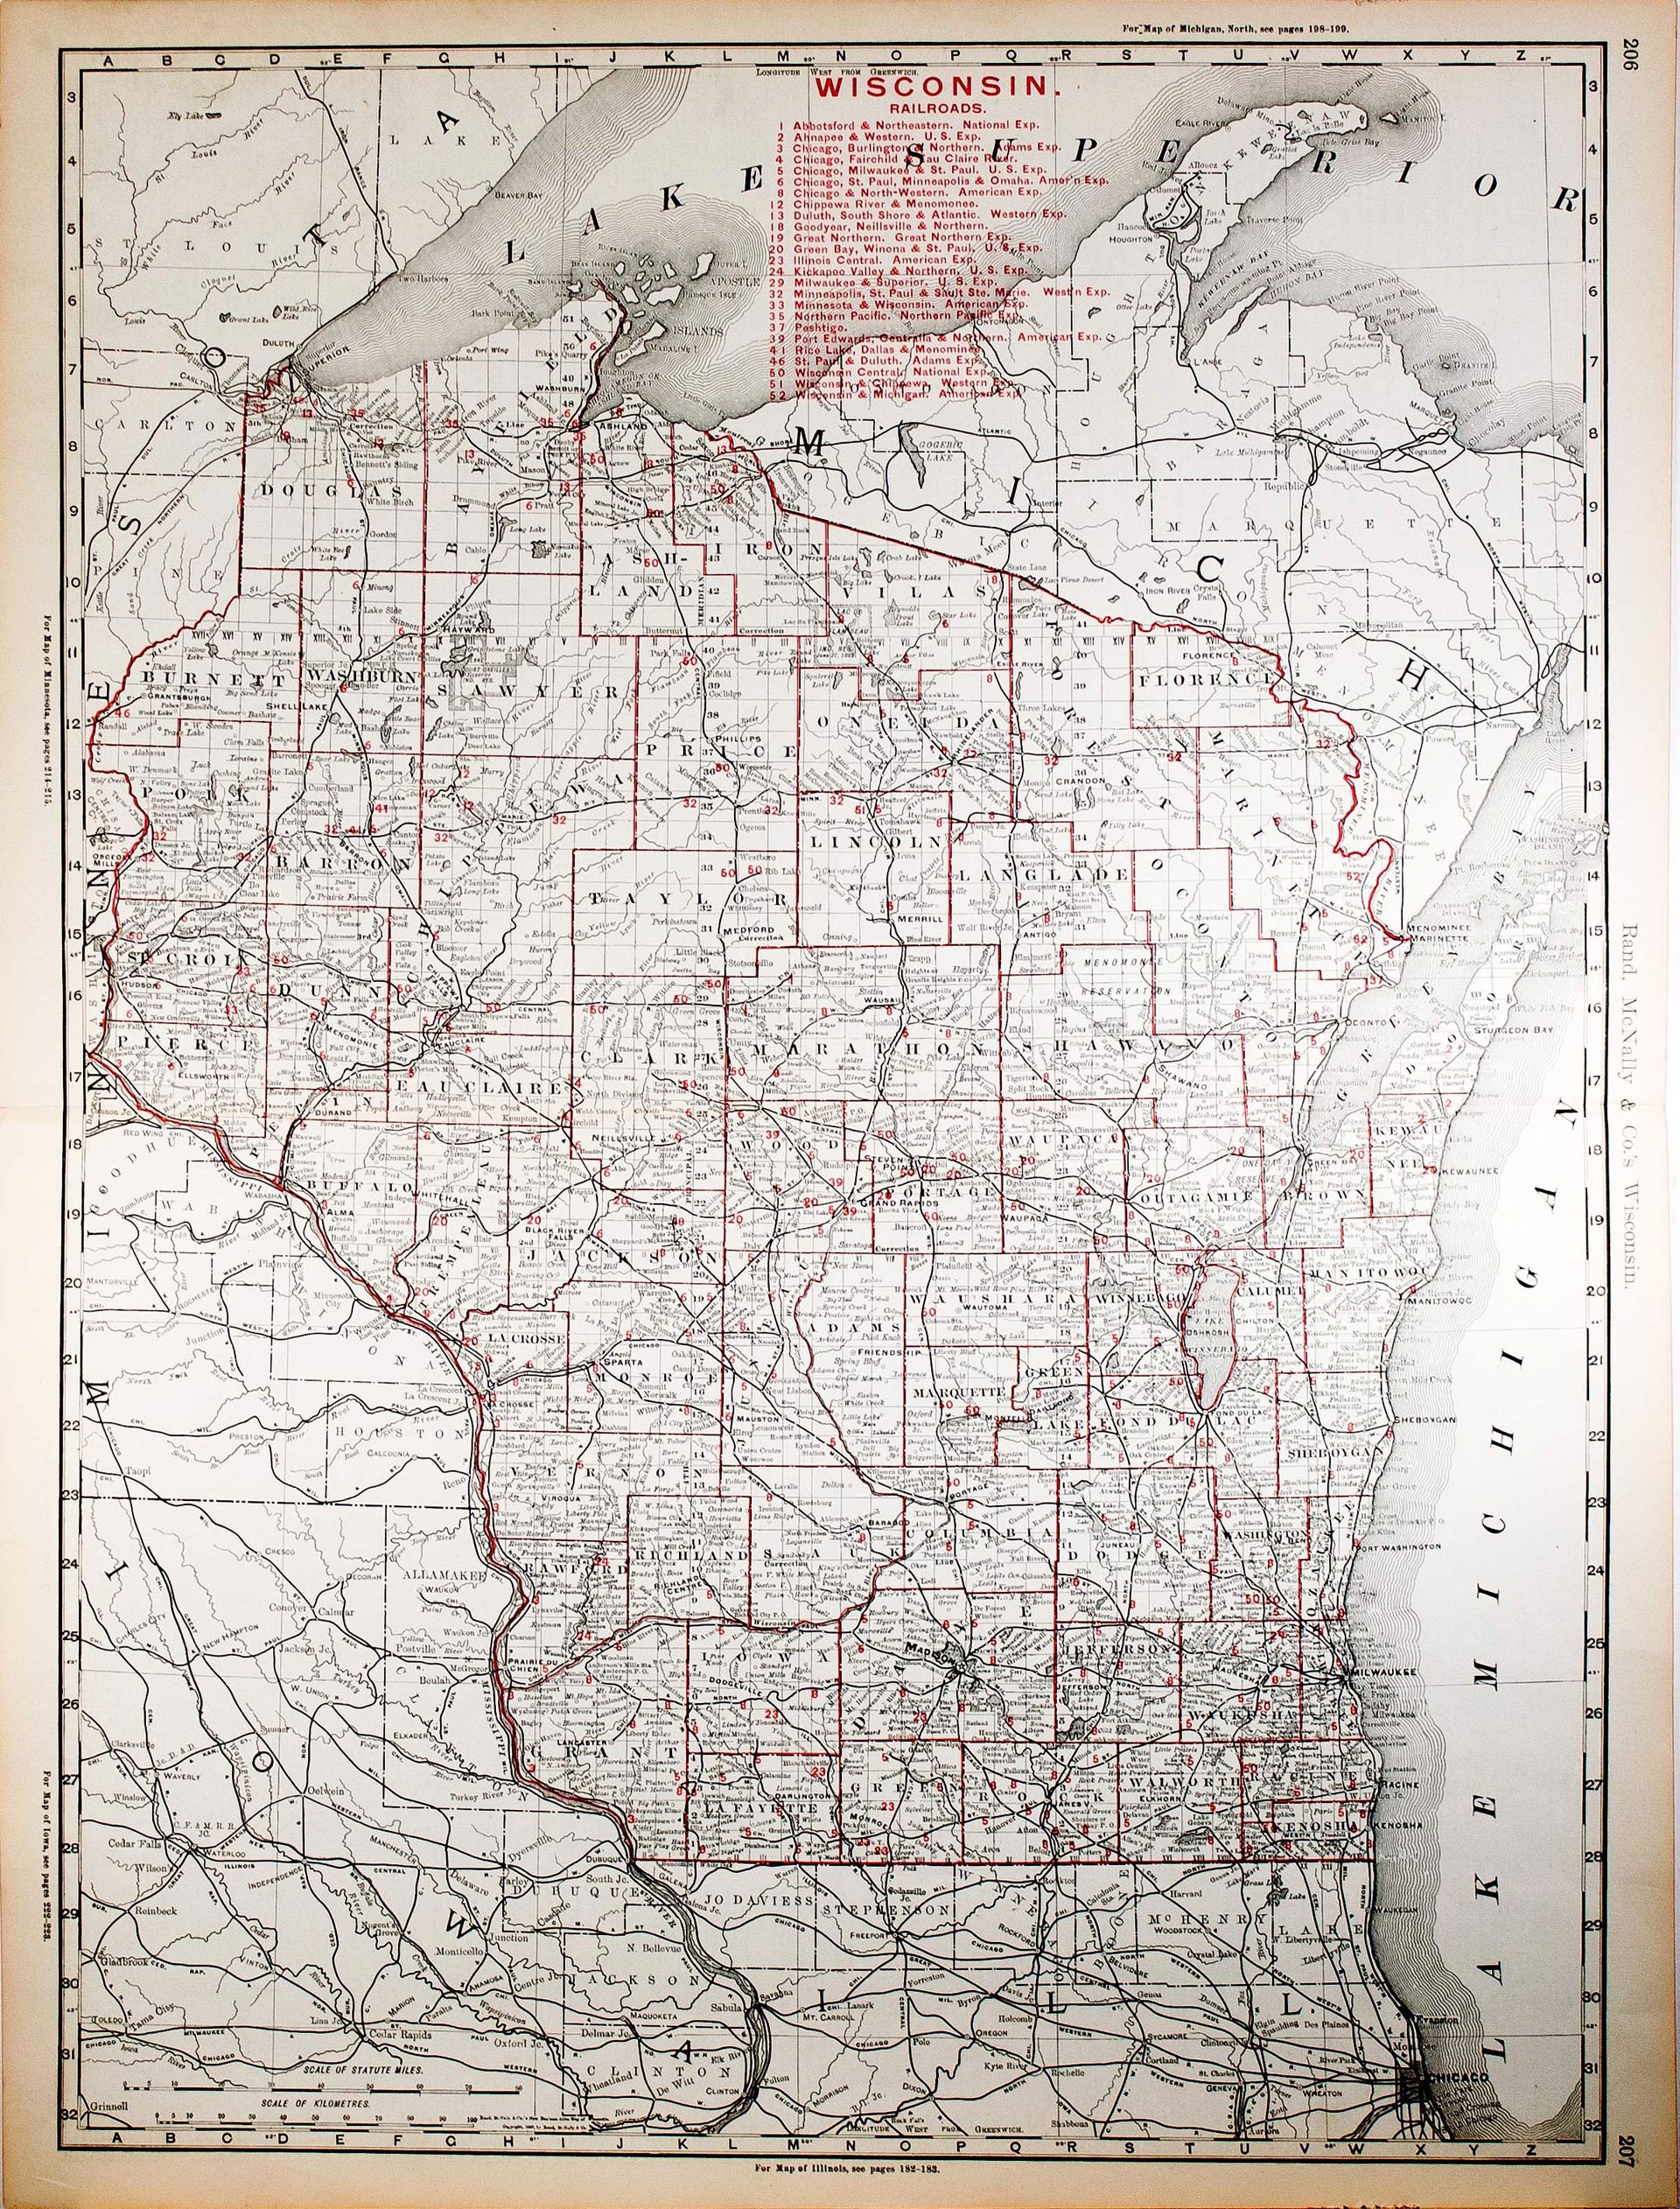 Map of Wisconsin Railroads by Unknown